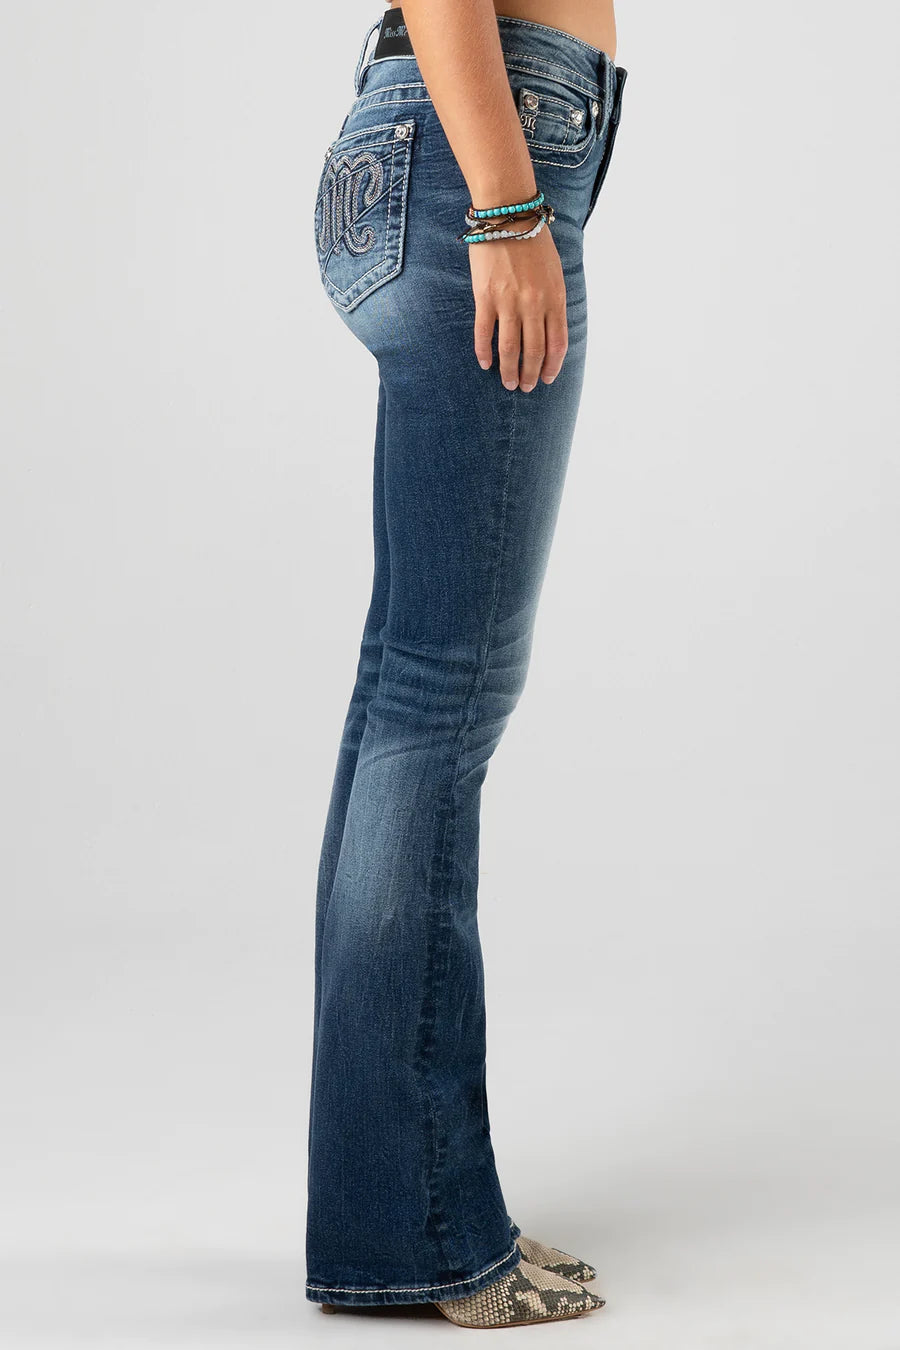 M787 Mid Rise Boot Jeans